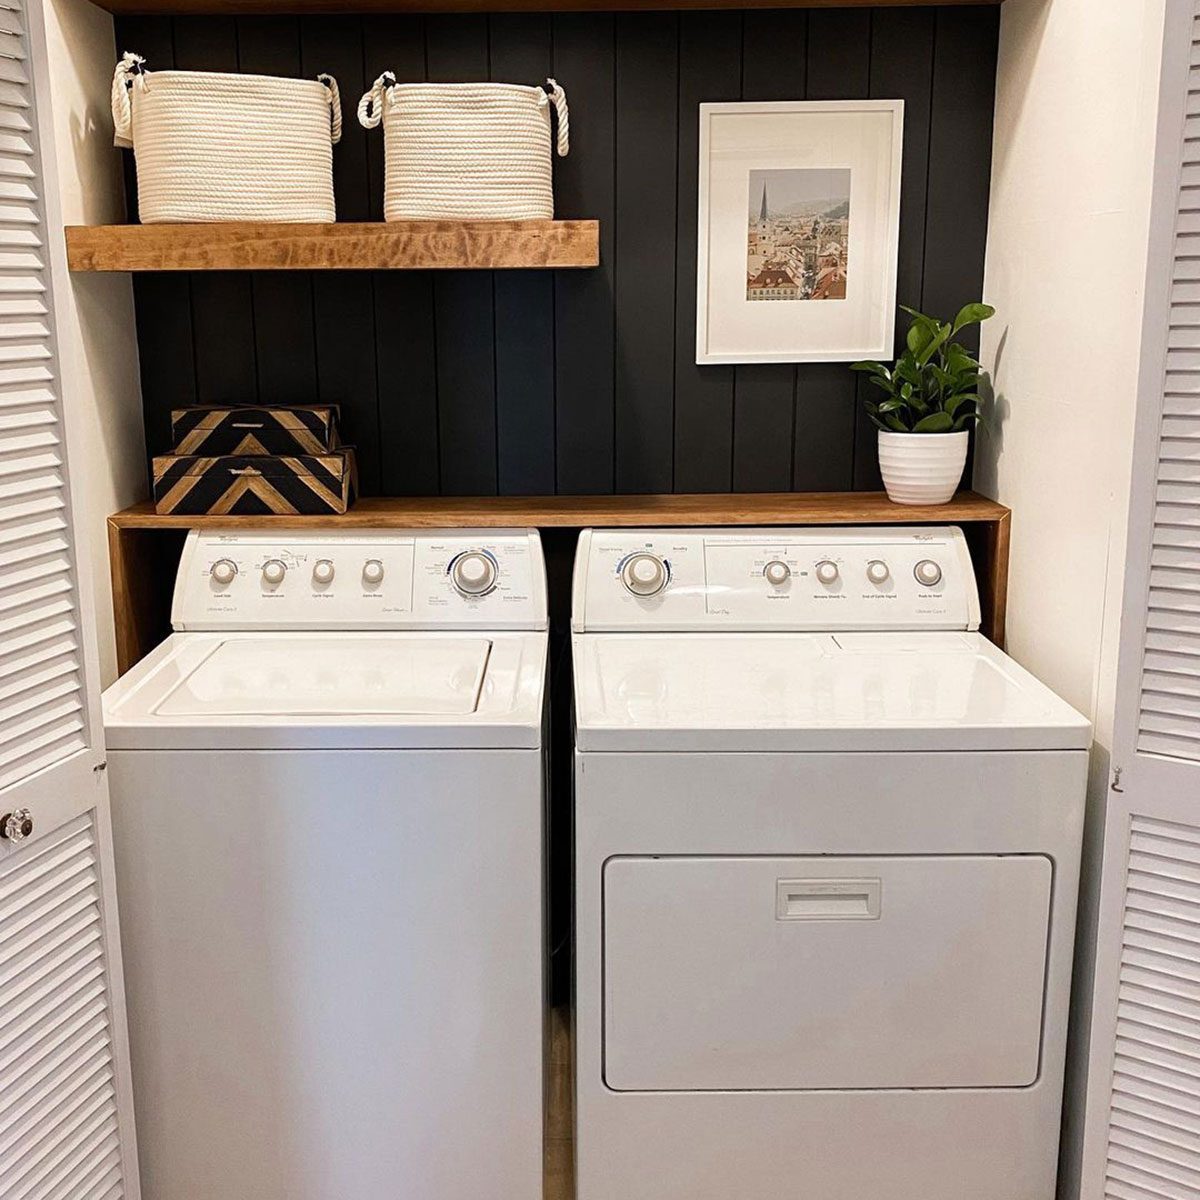 15 Small Laundry Room Ideas With a Top Loading Washer